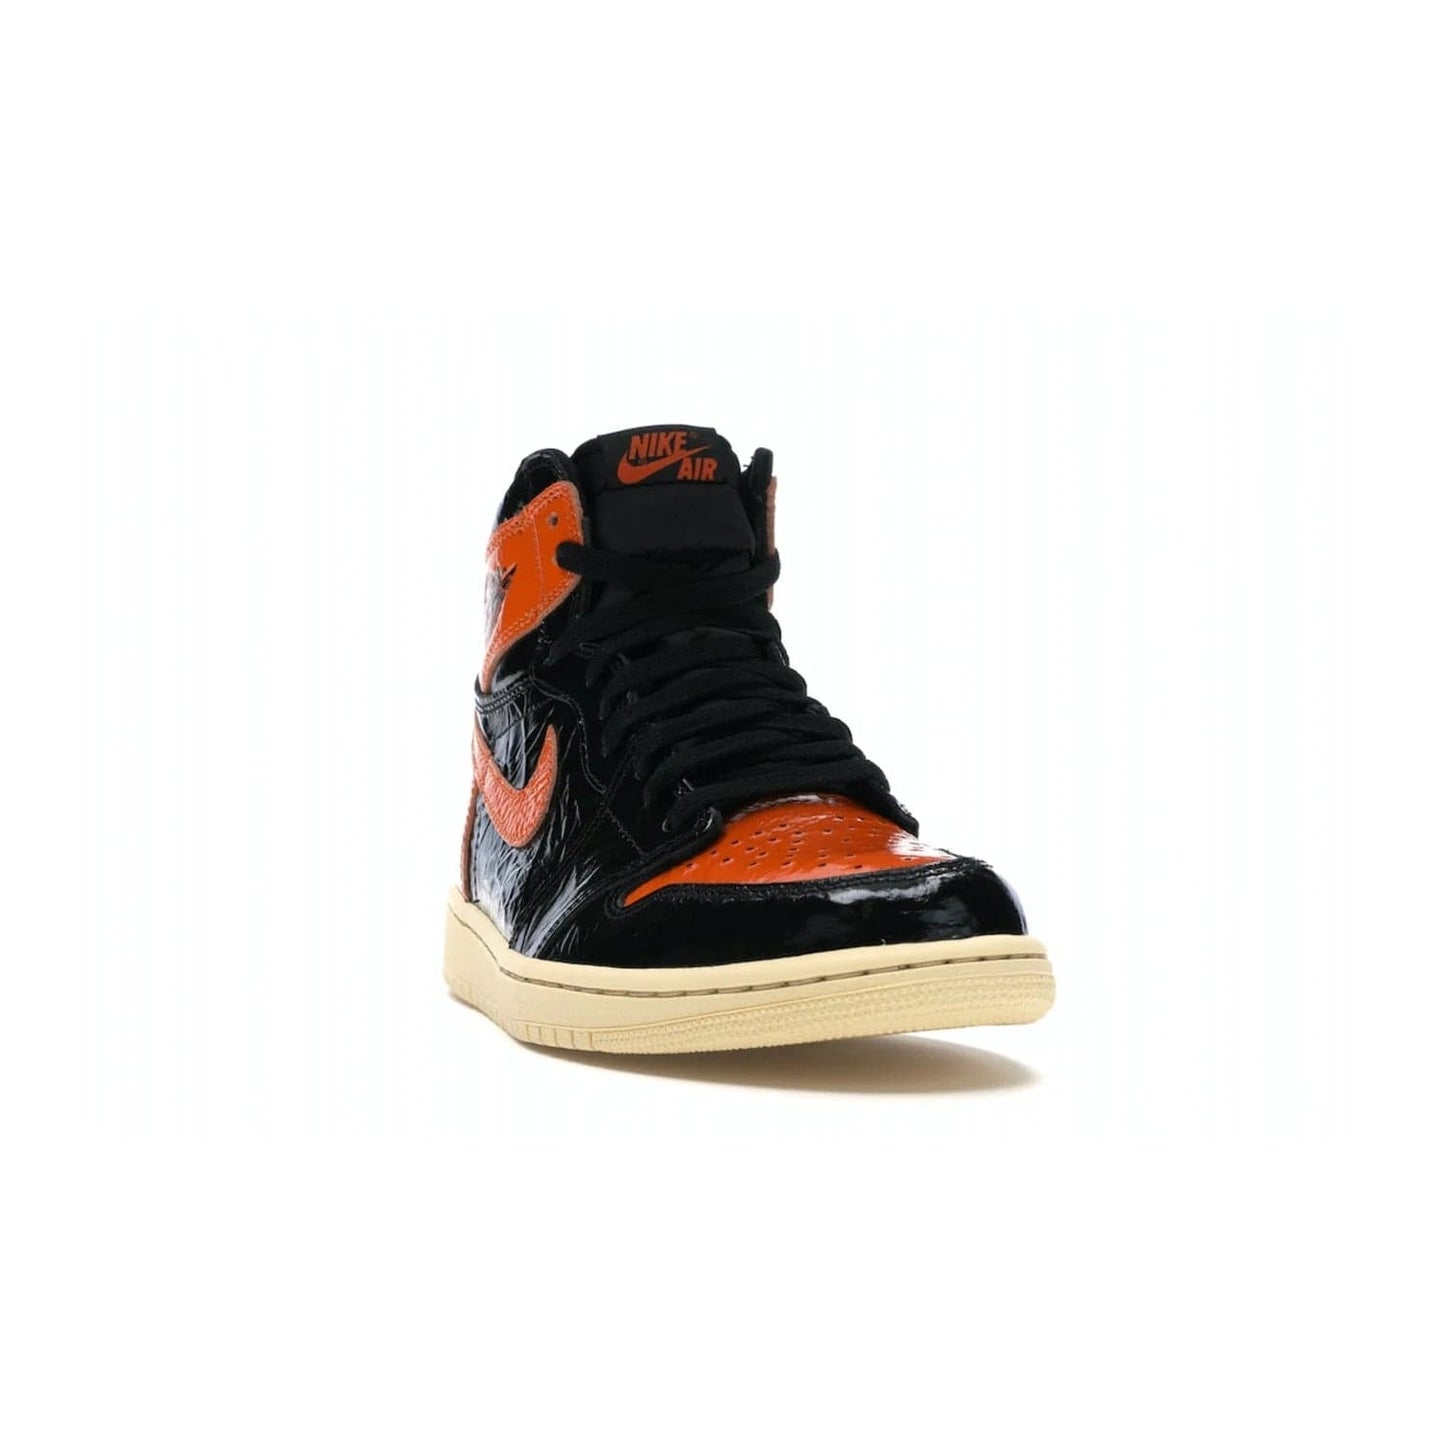 Jordan 1 Retro High Shattered Backboard 3.0 - Image 8 - Only at www.BallersClubKickz.com - #
Jordan 1 Retro High Shattered Backboard 3.0: the perfect blend of modern style and nostalgic flair featuring an orange and black crinkled patent leather upper and yellowed vanilla outsole. Get these exclusive sneakers released in October of 2019!